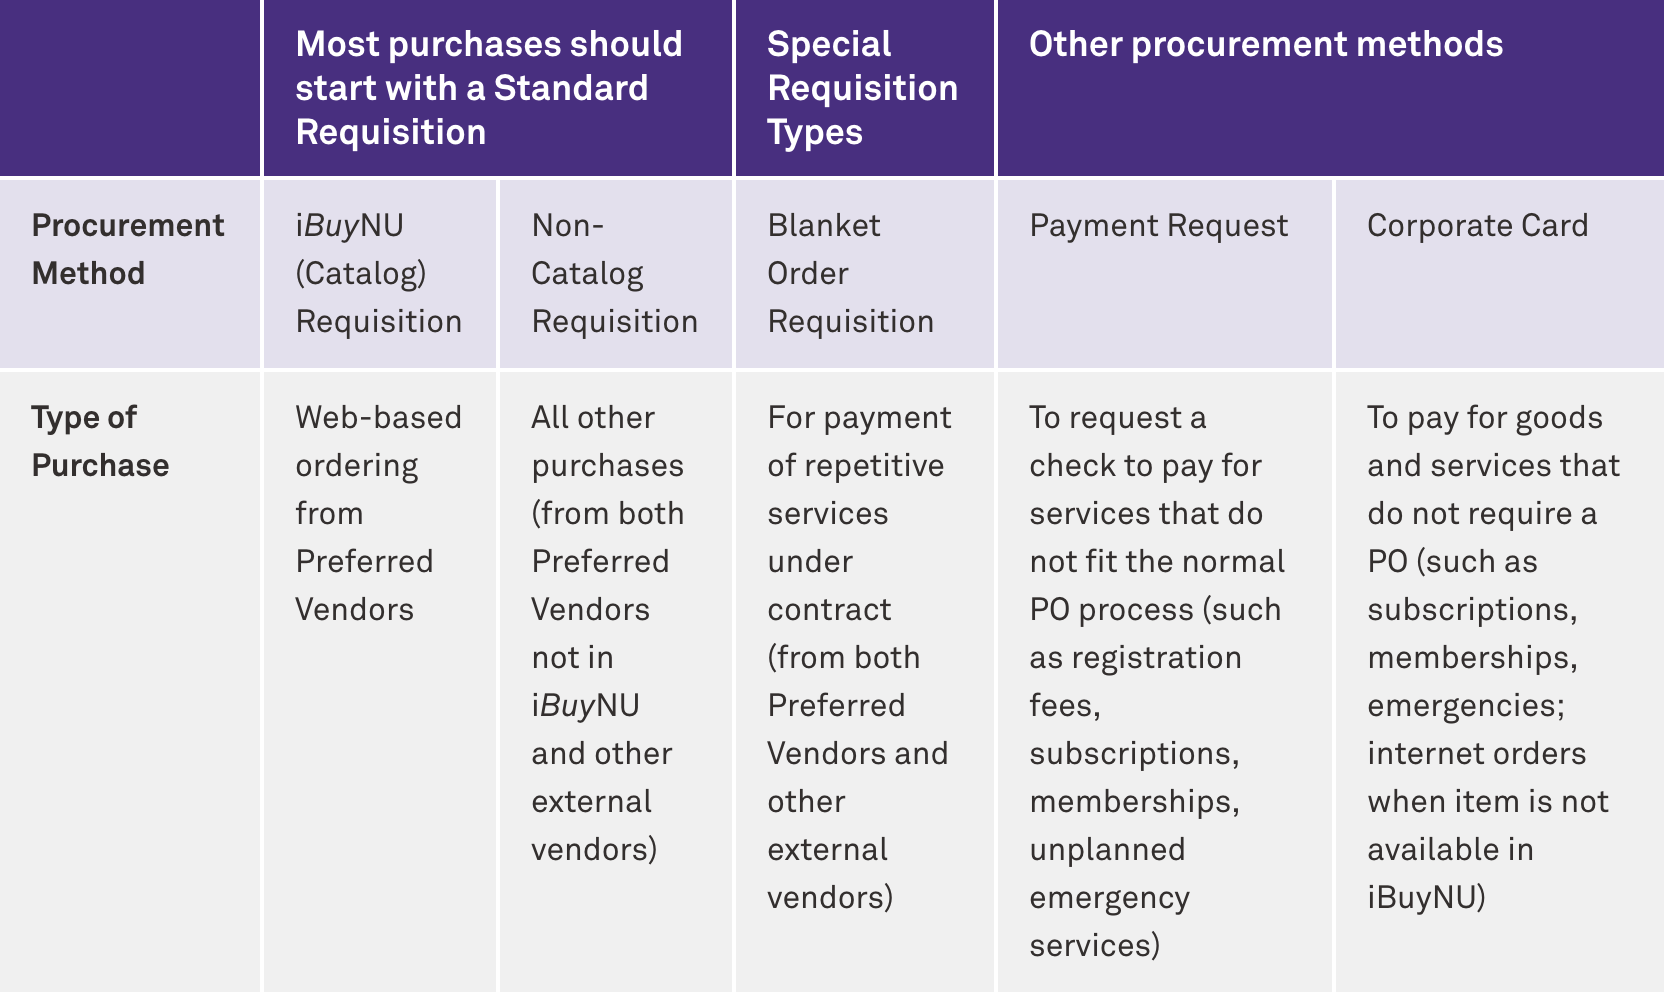 procurement methods table explaining when to use different types of purchasing tools